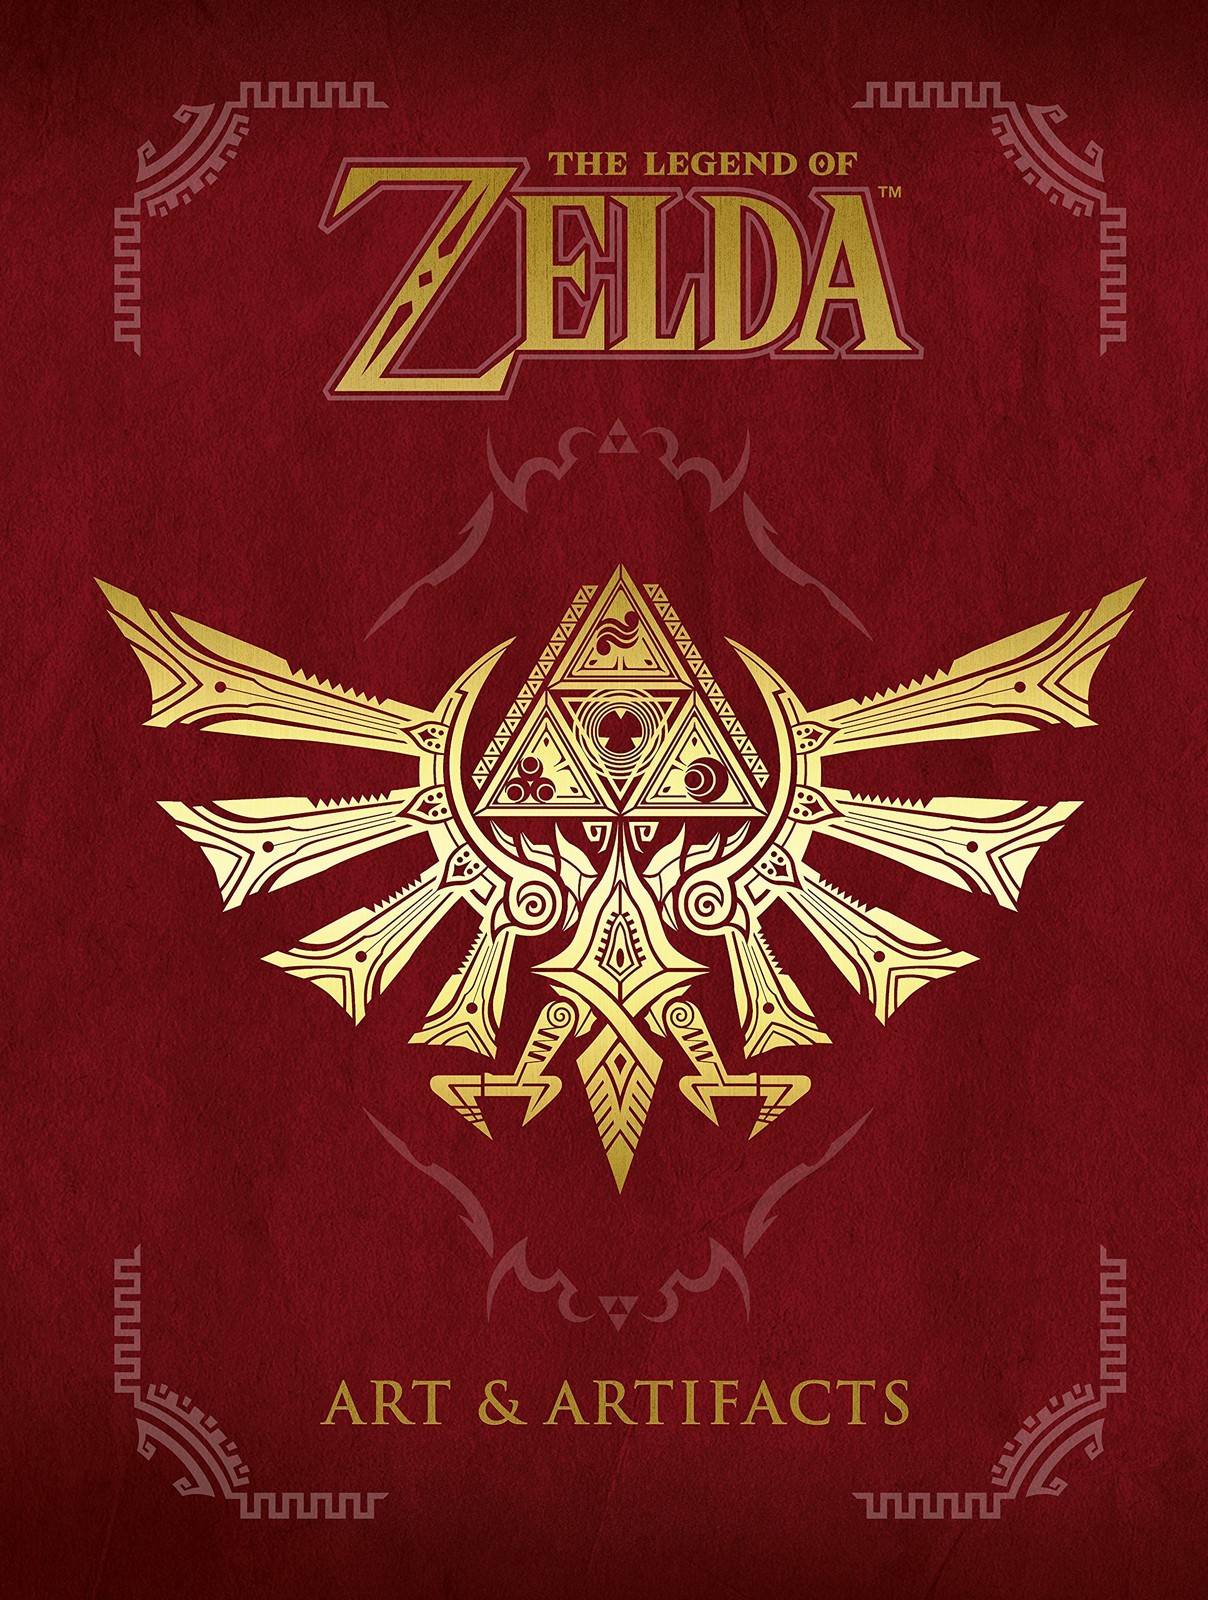 Dark Horse - The Legend of Zelda: Art and Artifacts, 427 Pages